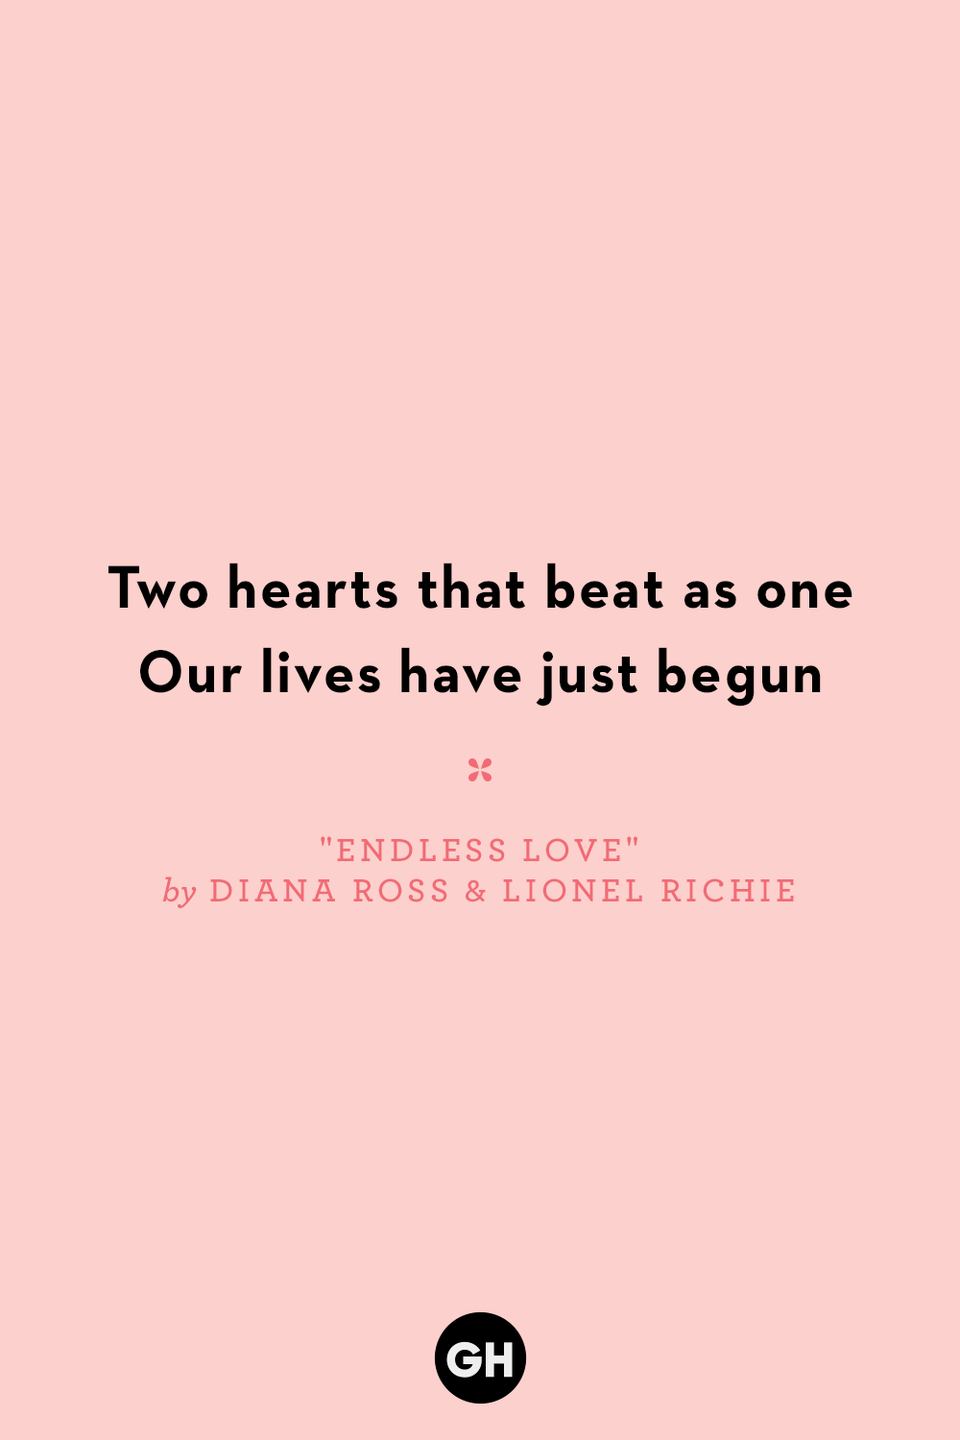 <p>Two hearts that beat as one</p><p>Our lives have just begun</p>